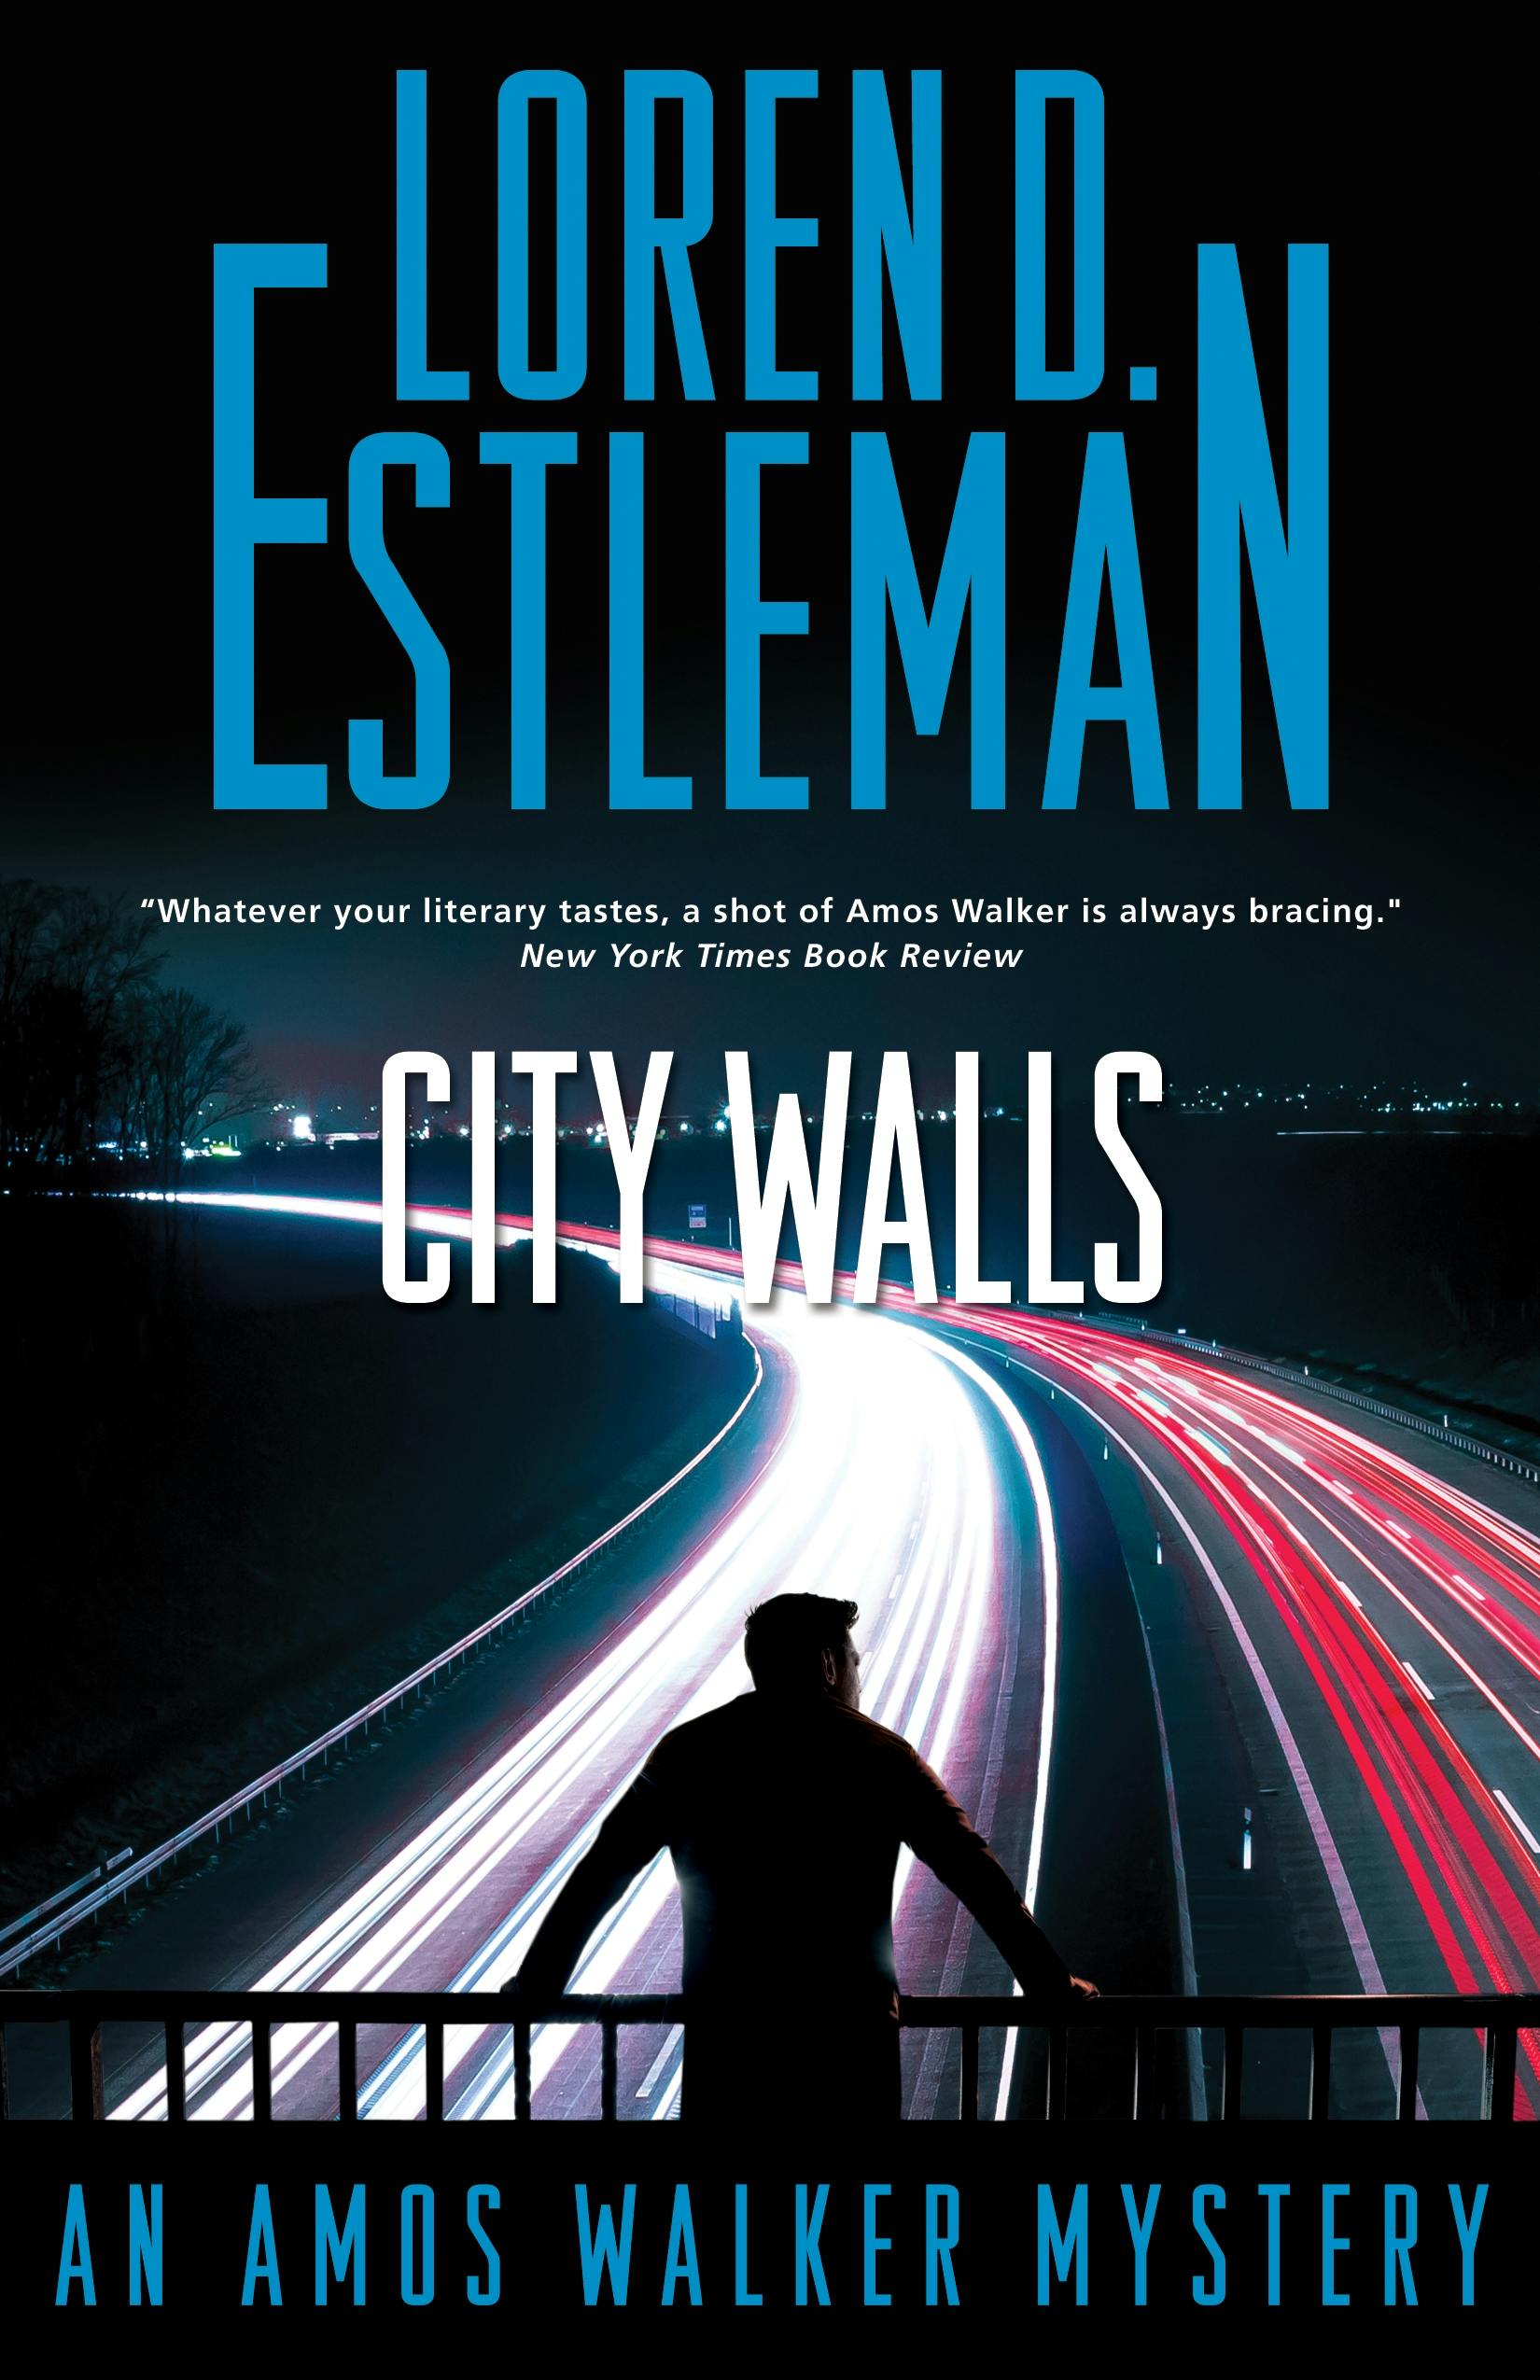 Cover for the book titled as: City Walls